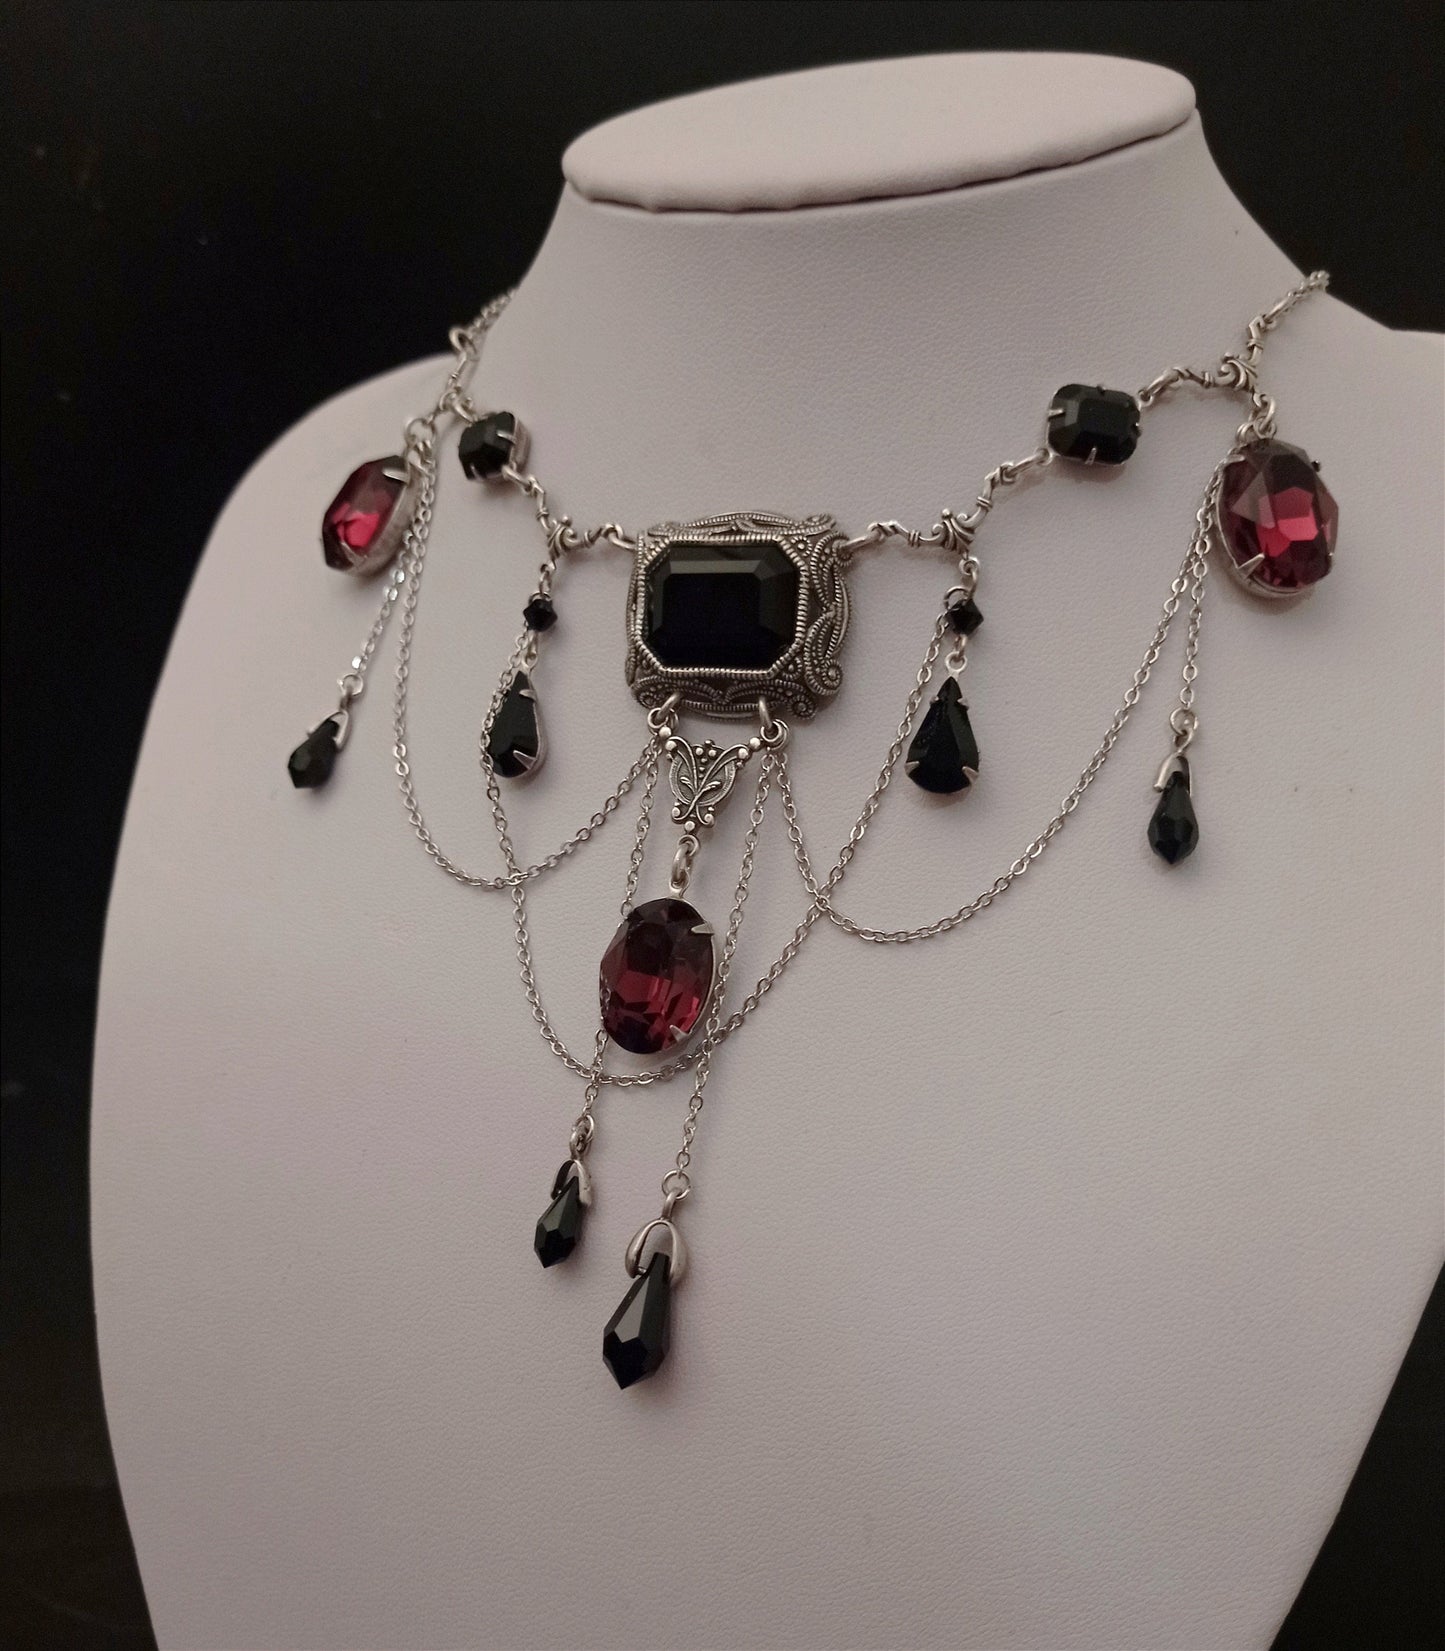 Black and Burgundy Waterfall Necklace